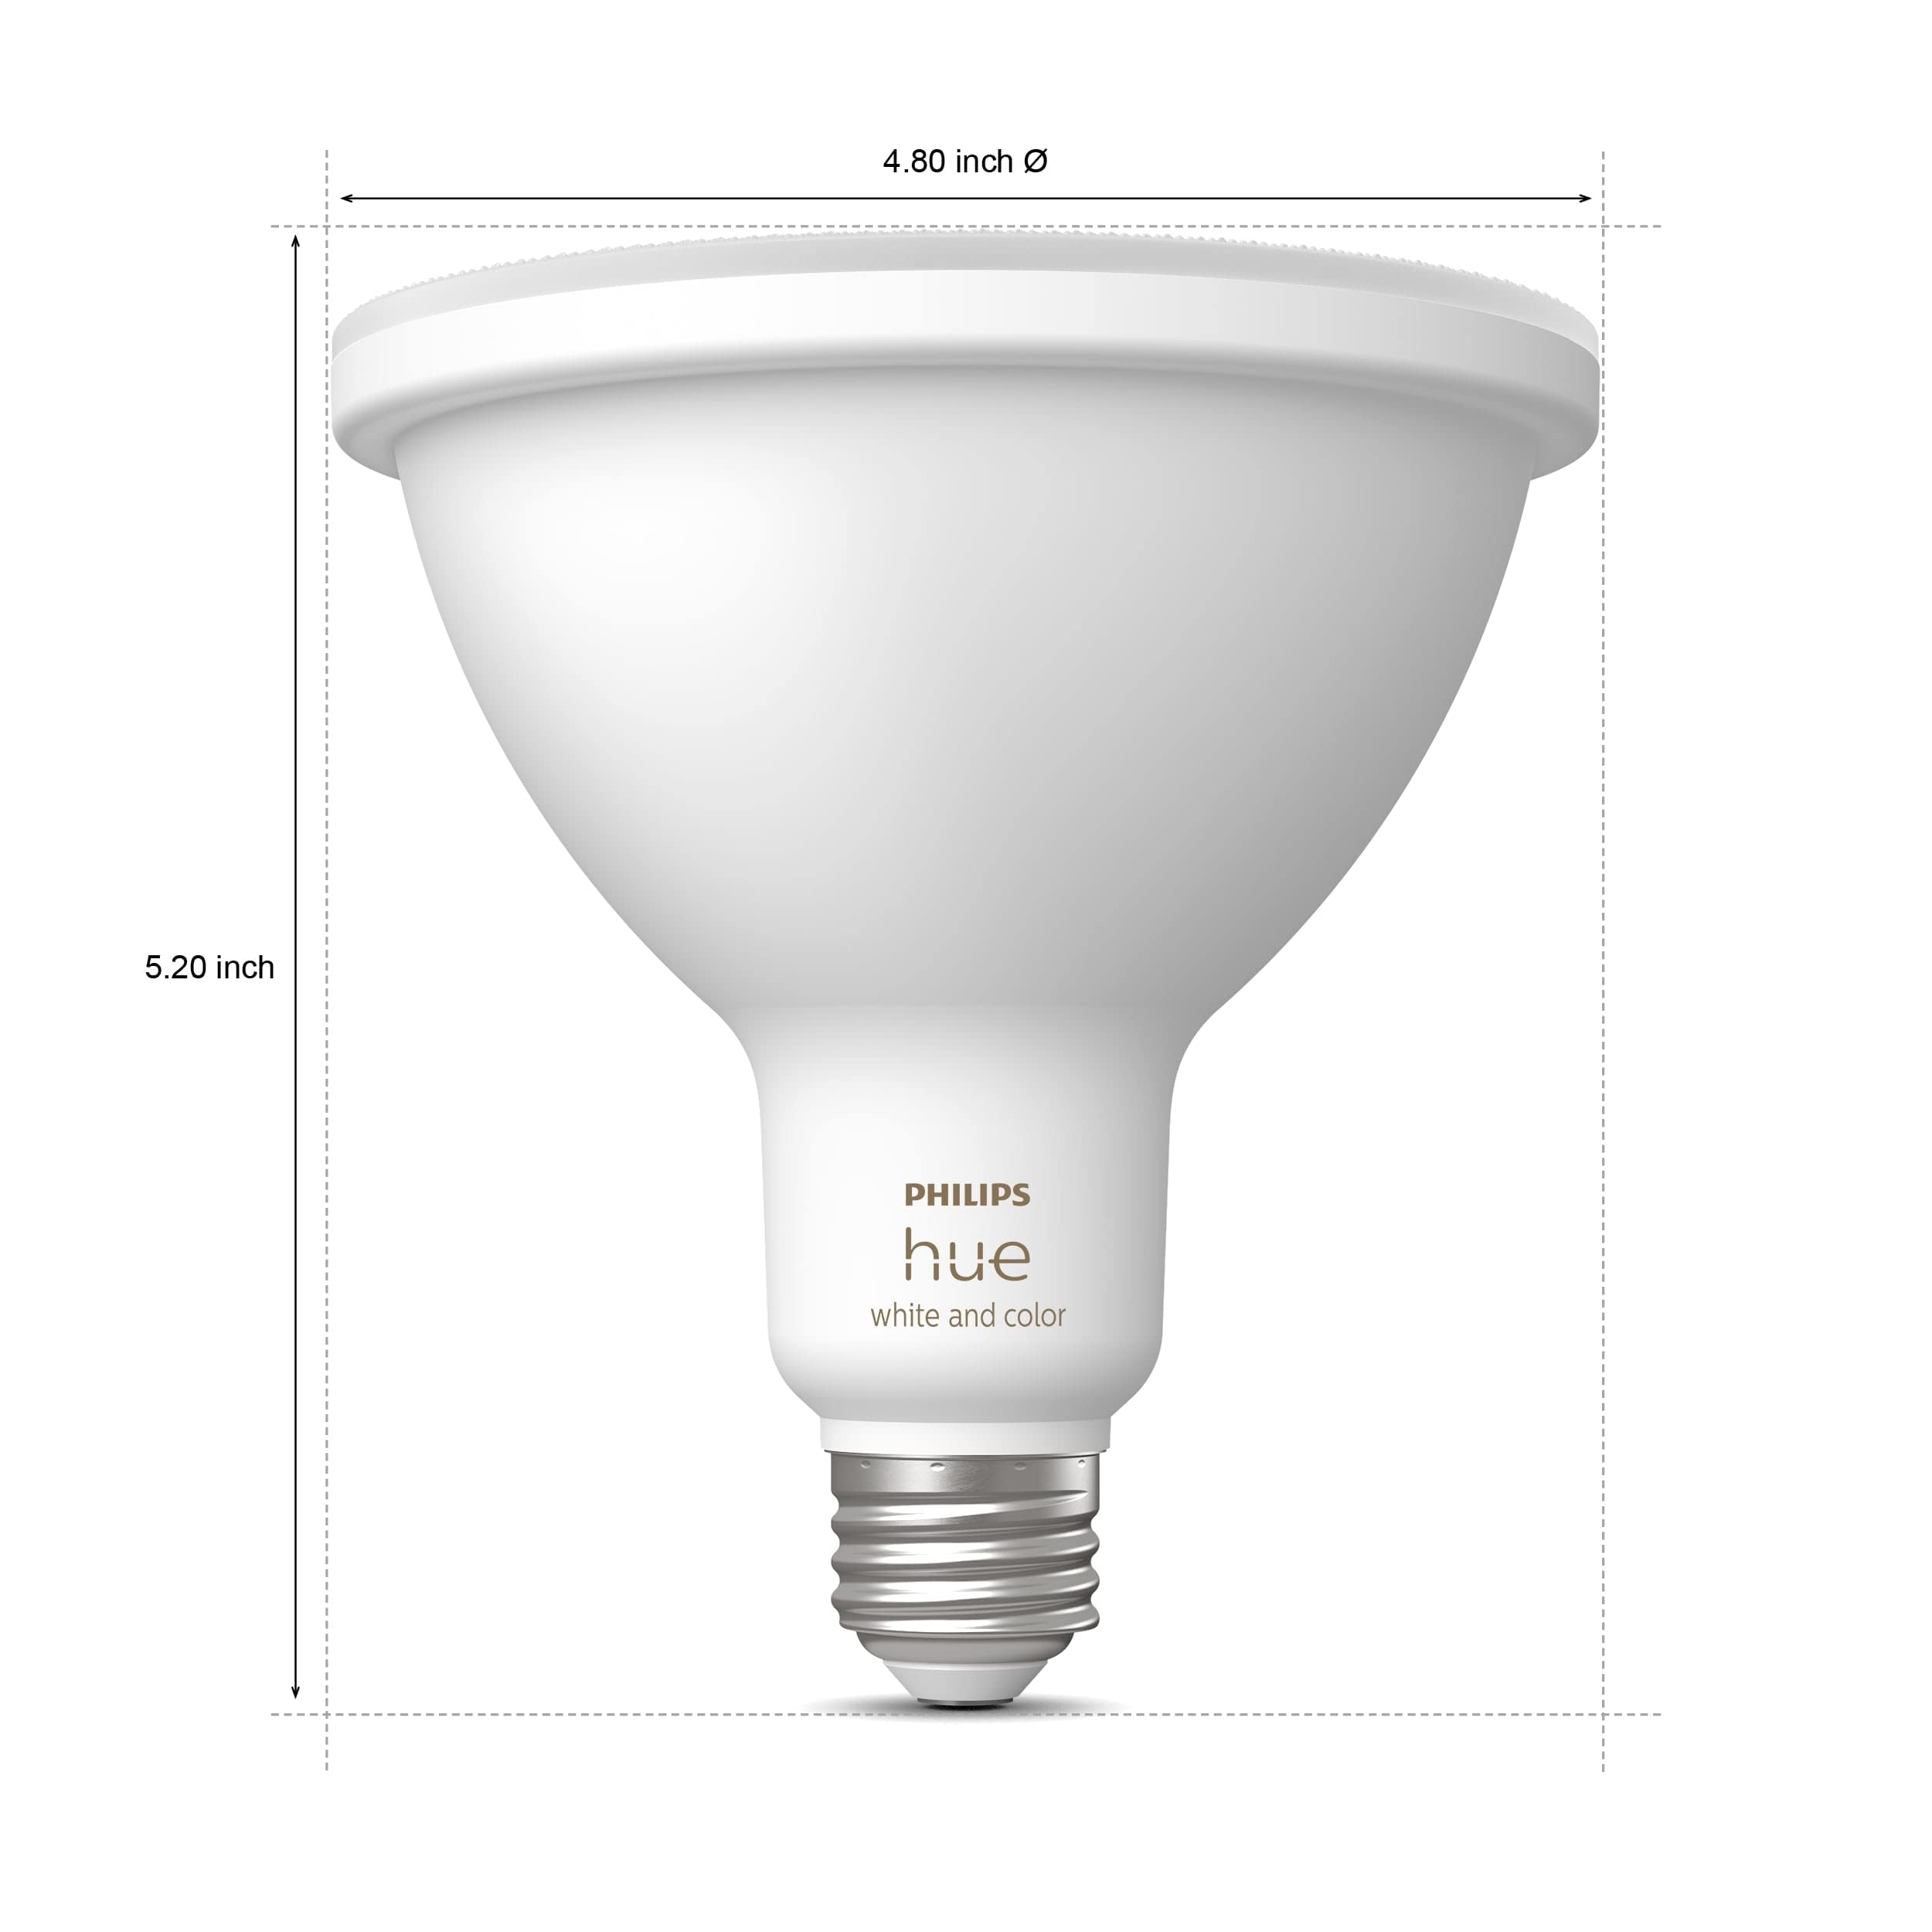 Philips Hue Smart 100W PAR38 LED Bulb - White and Color Ambiance Color-Changing Light - 2 Pack - 1300LM - E26 - Outdoor - Control with Hue App - Works with Alexa, Google Assistant and Apple Homekit